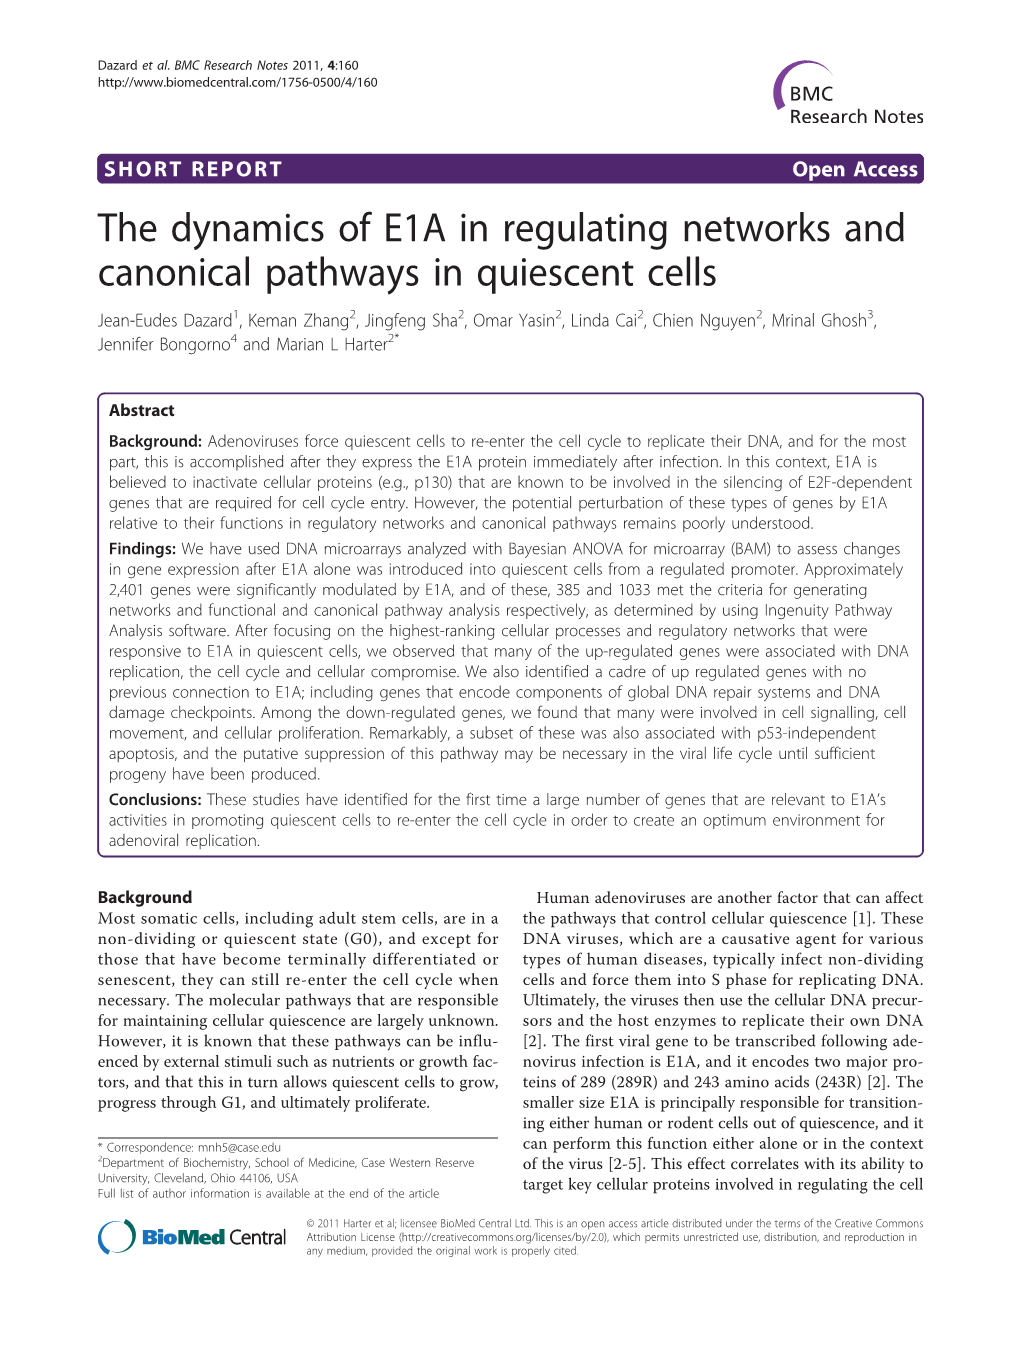 The Dynamics of E1A in Regulating Networks and Canonical Pathways